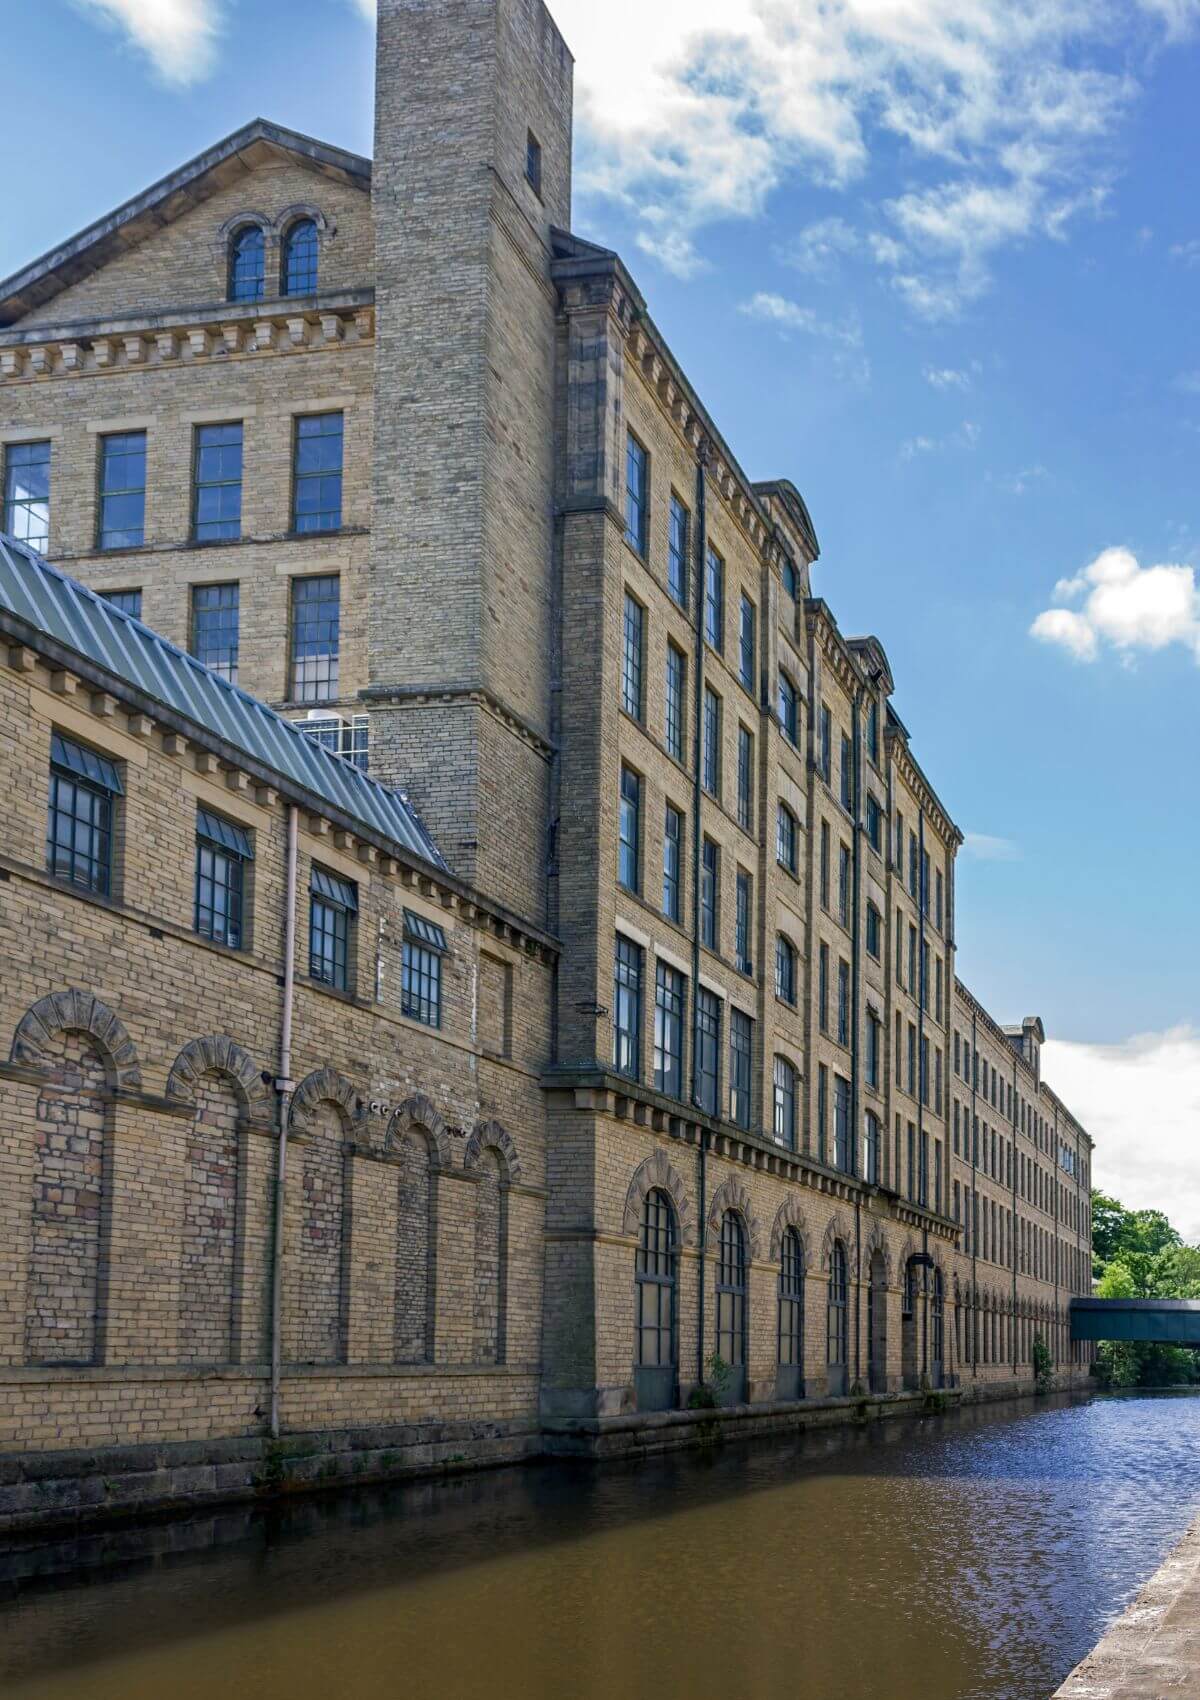 Saltaire is a UNESCO-listed town in Yorkshire